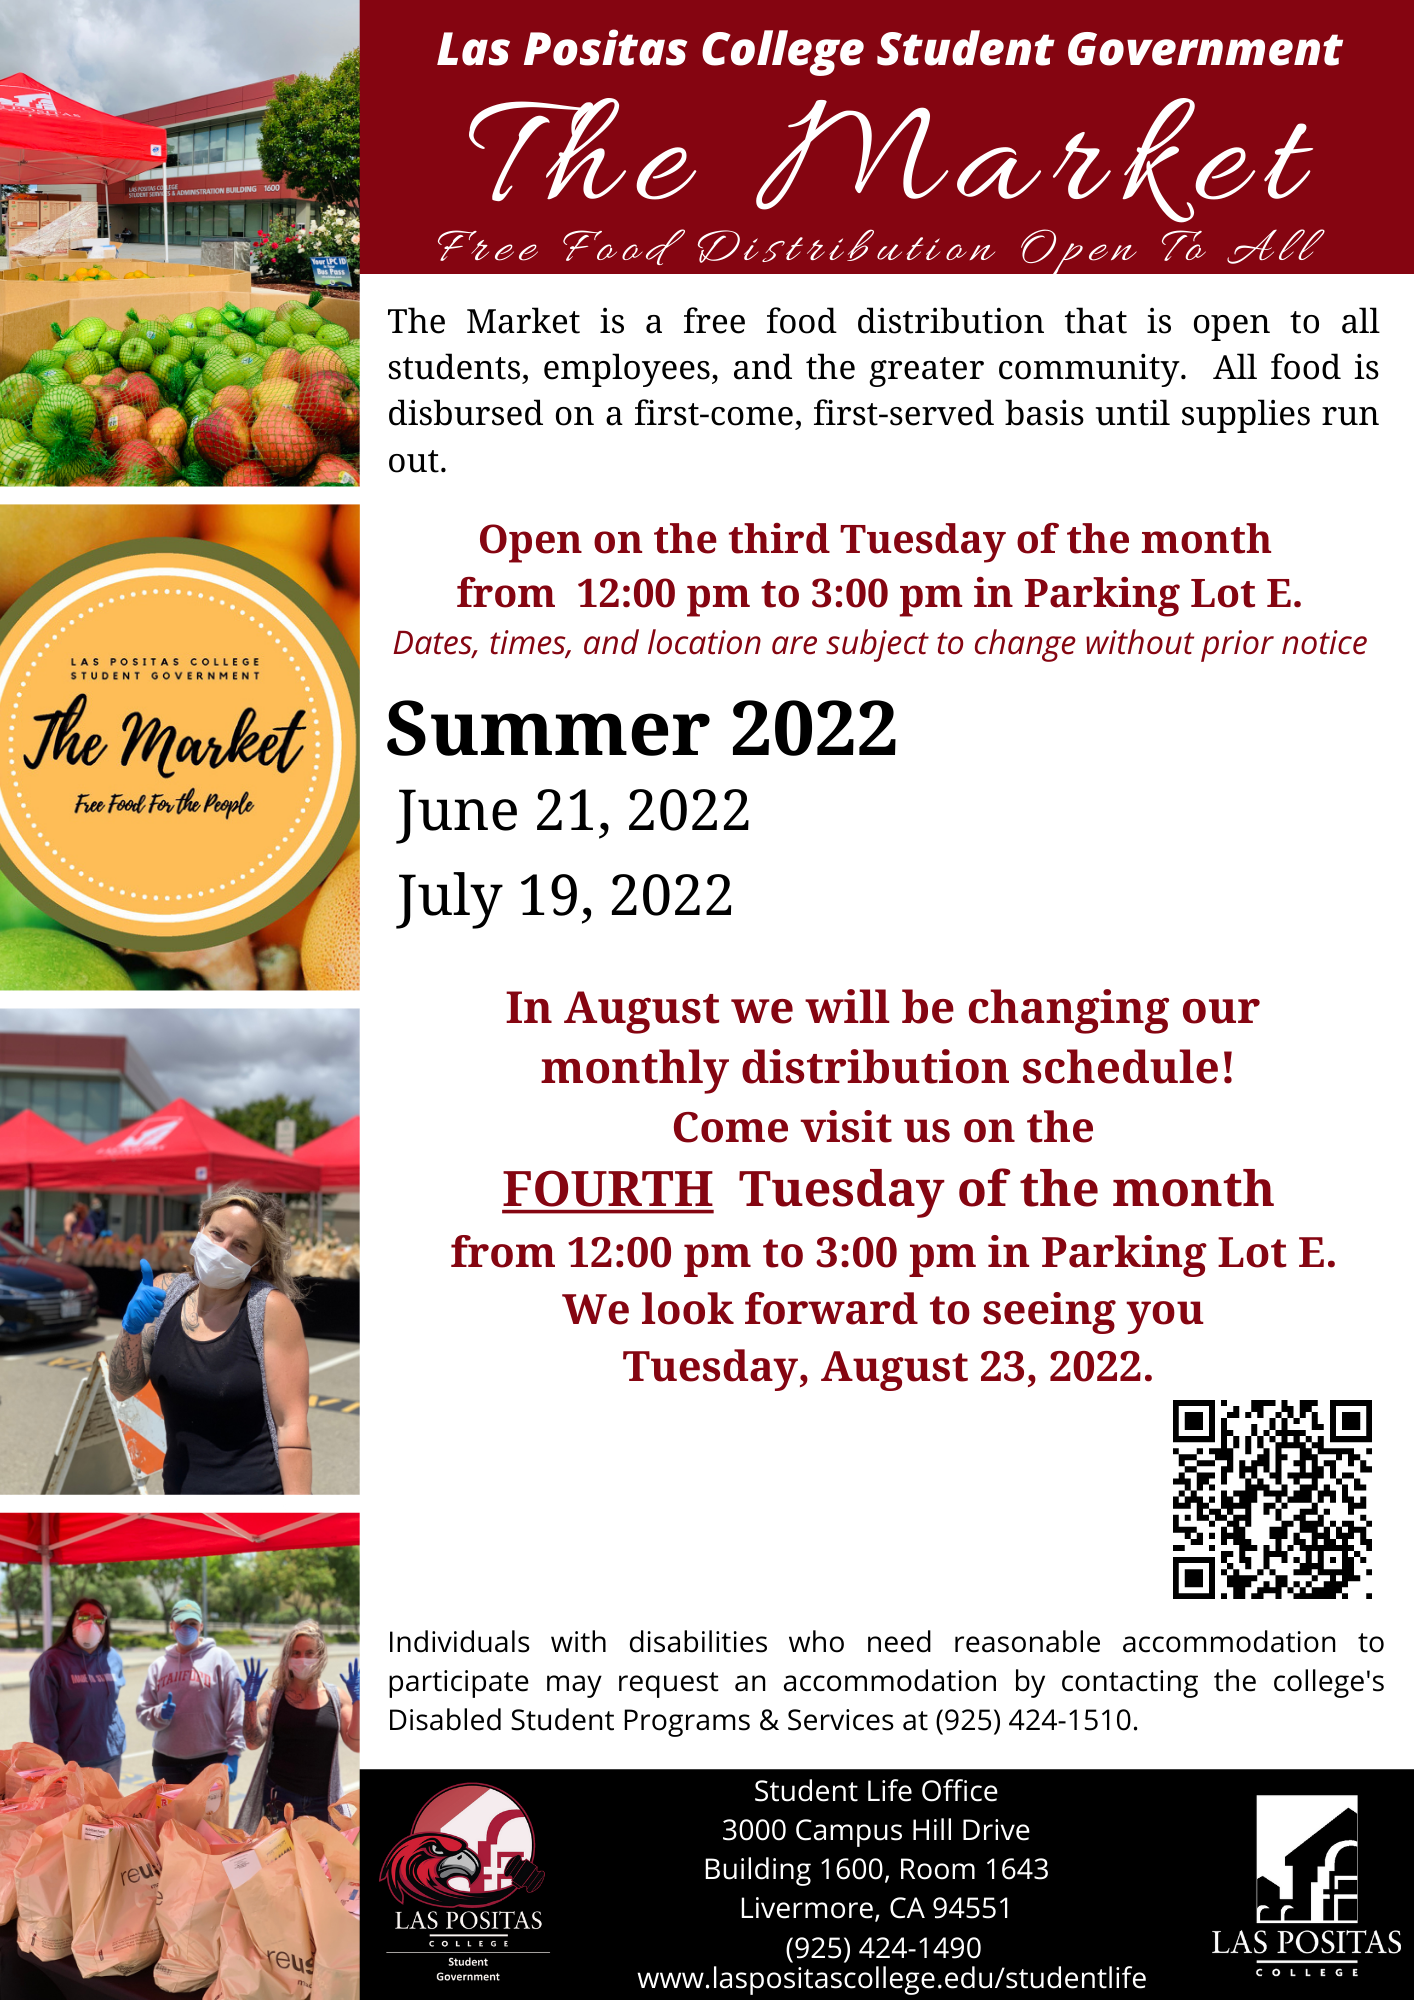 The Market Summer 2022 Flyer with New Schedule Announcement and QR Code